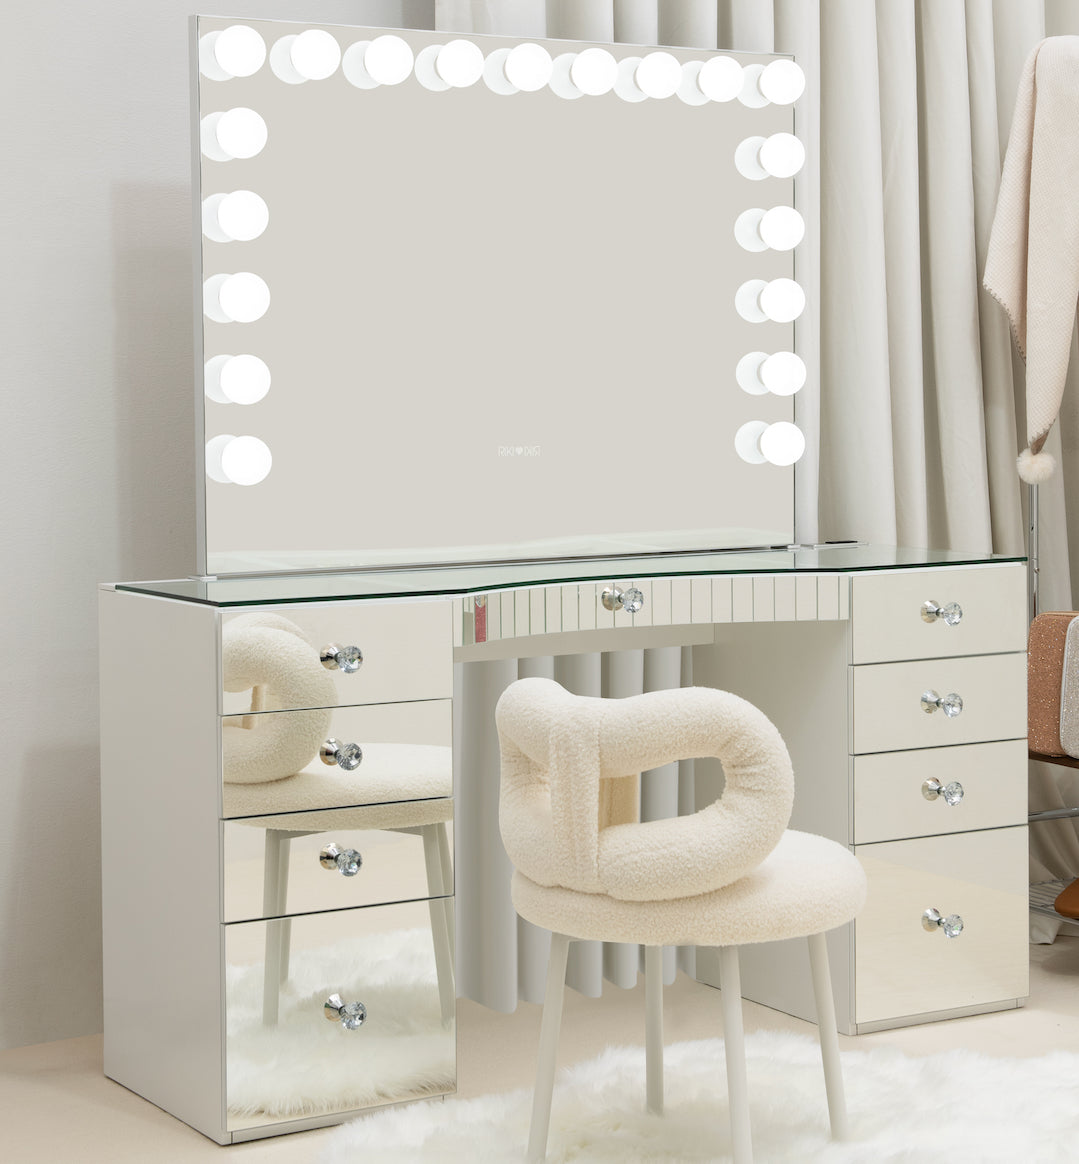 Riki Loves Riki Hollywood mirror featuring smooth dimming control and power vanity integration.